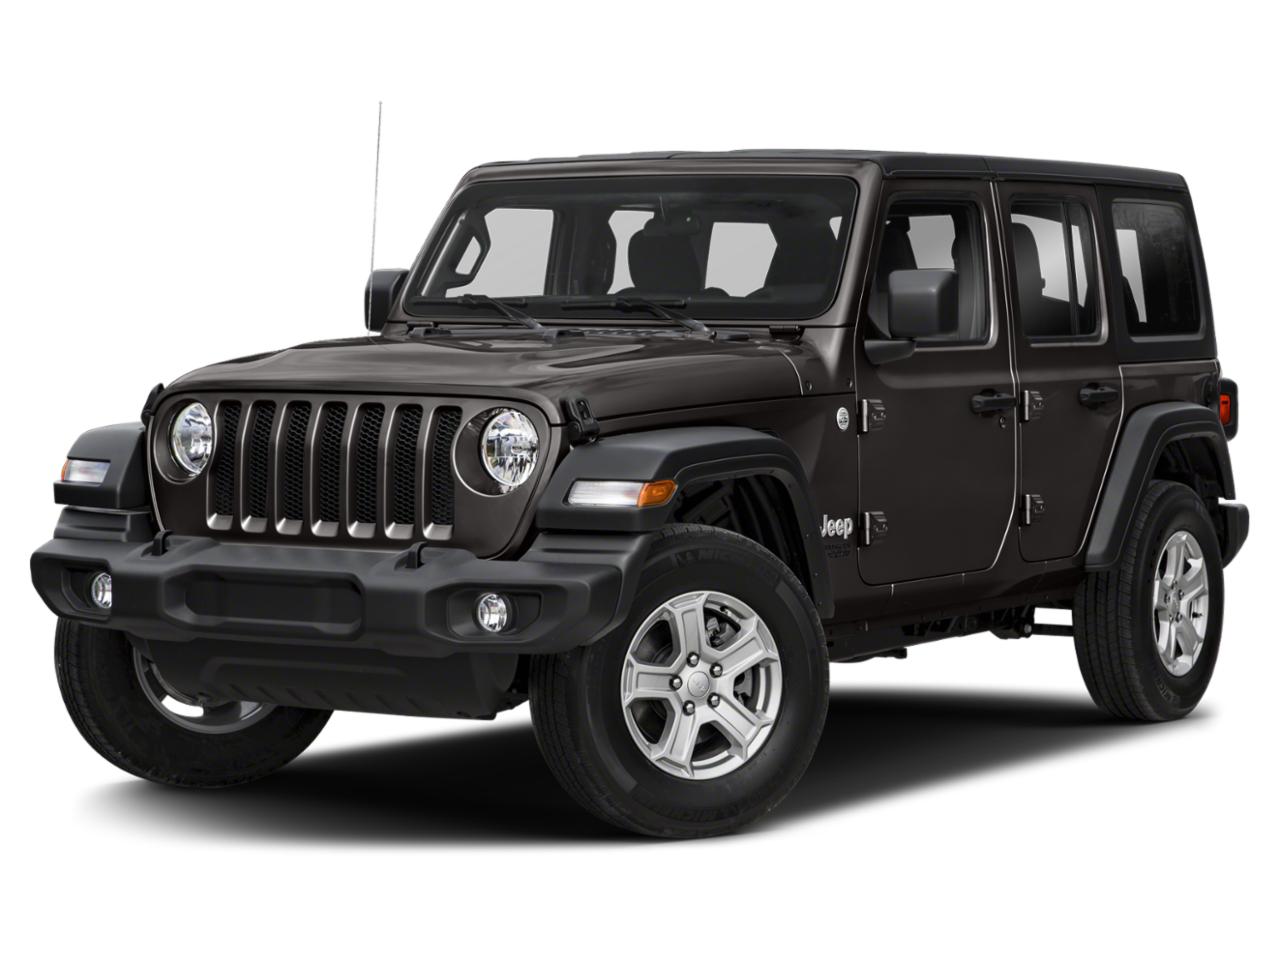 2018 Jeep Wrangler Unlimited Vehicle Photo in Saint Charles, IL 60174